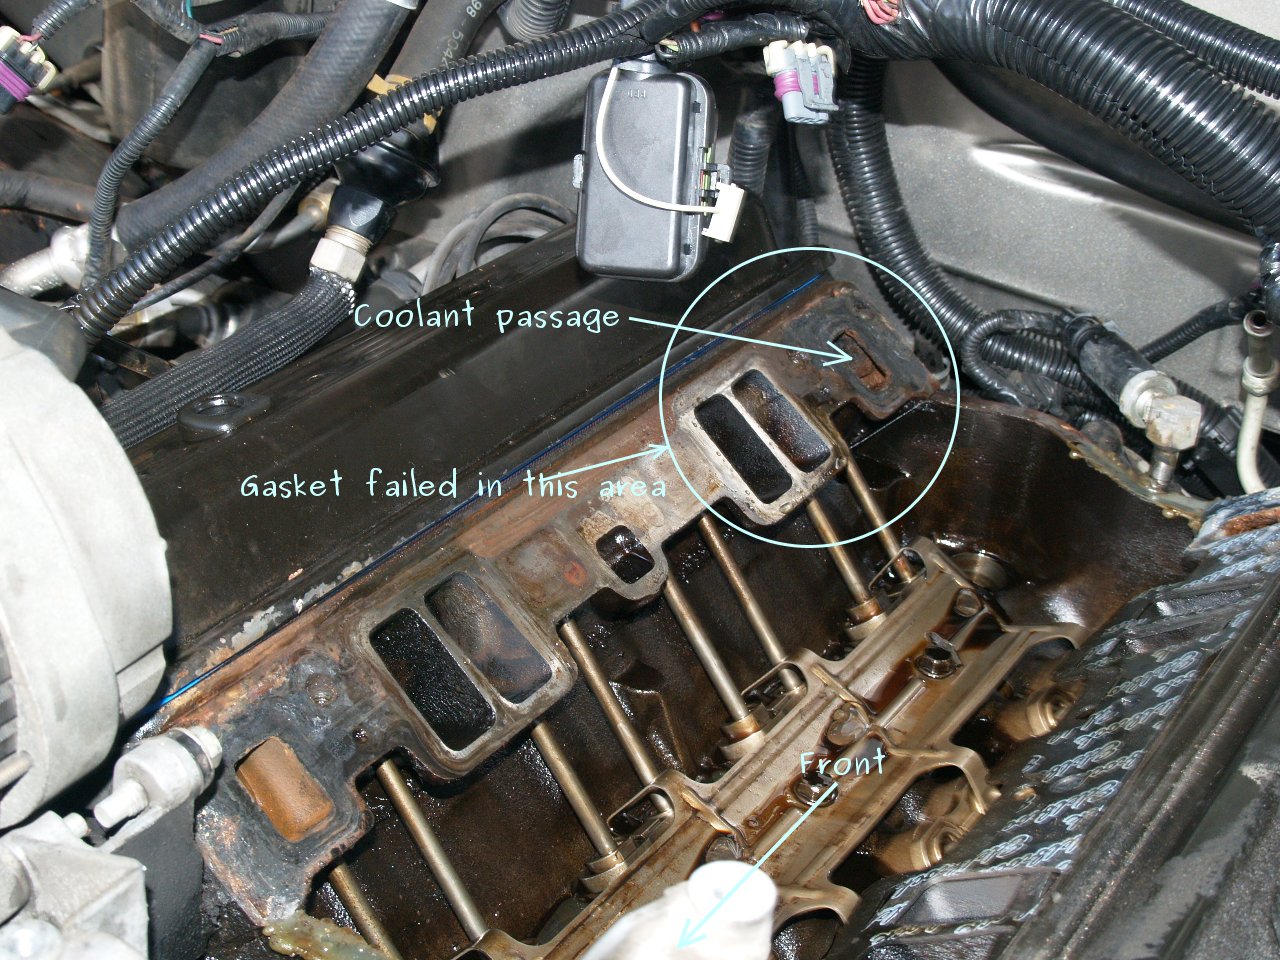 See P359E in engine